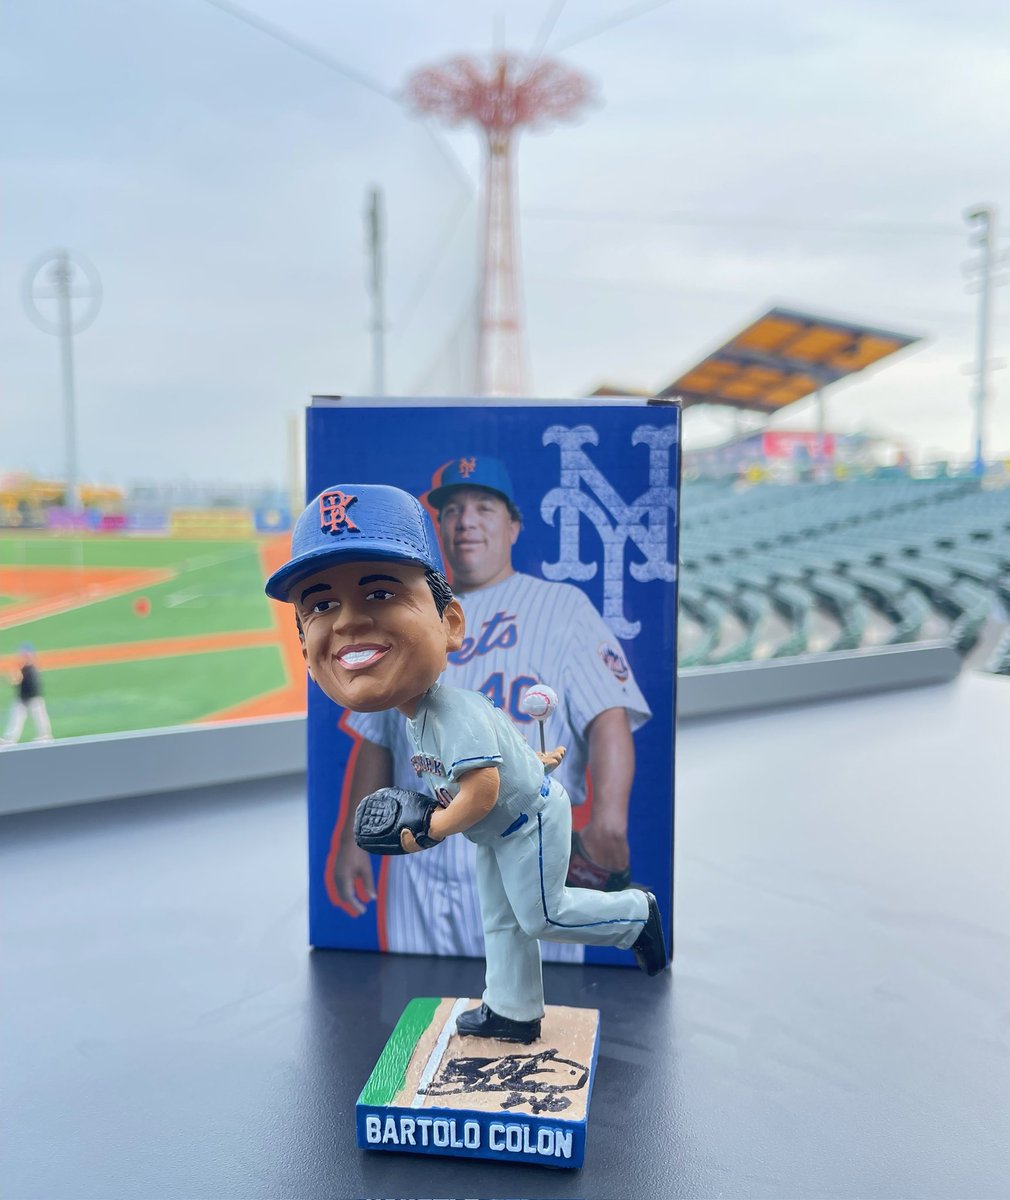 It's the anniversary of Bartolo Colon's legendary homer, so we're giving away a SIGNED bobblehead! 🤩 Like and follow to enter!